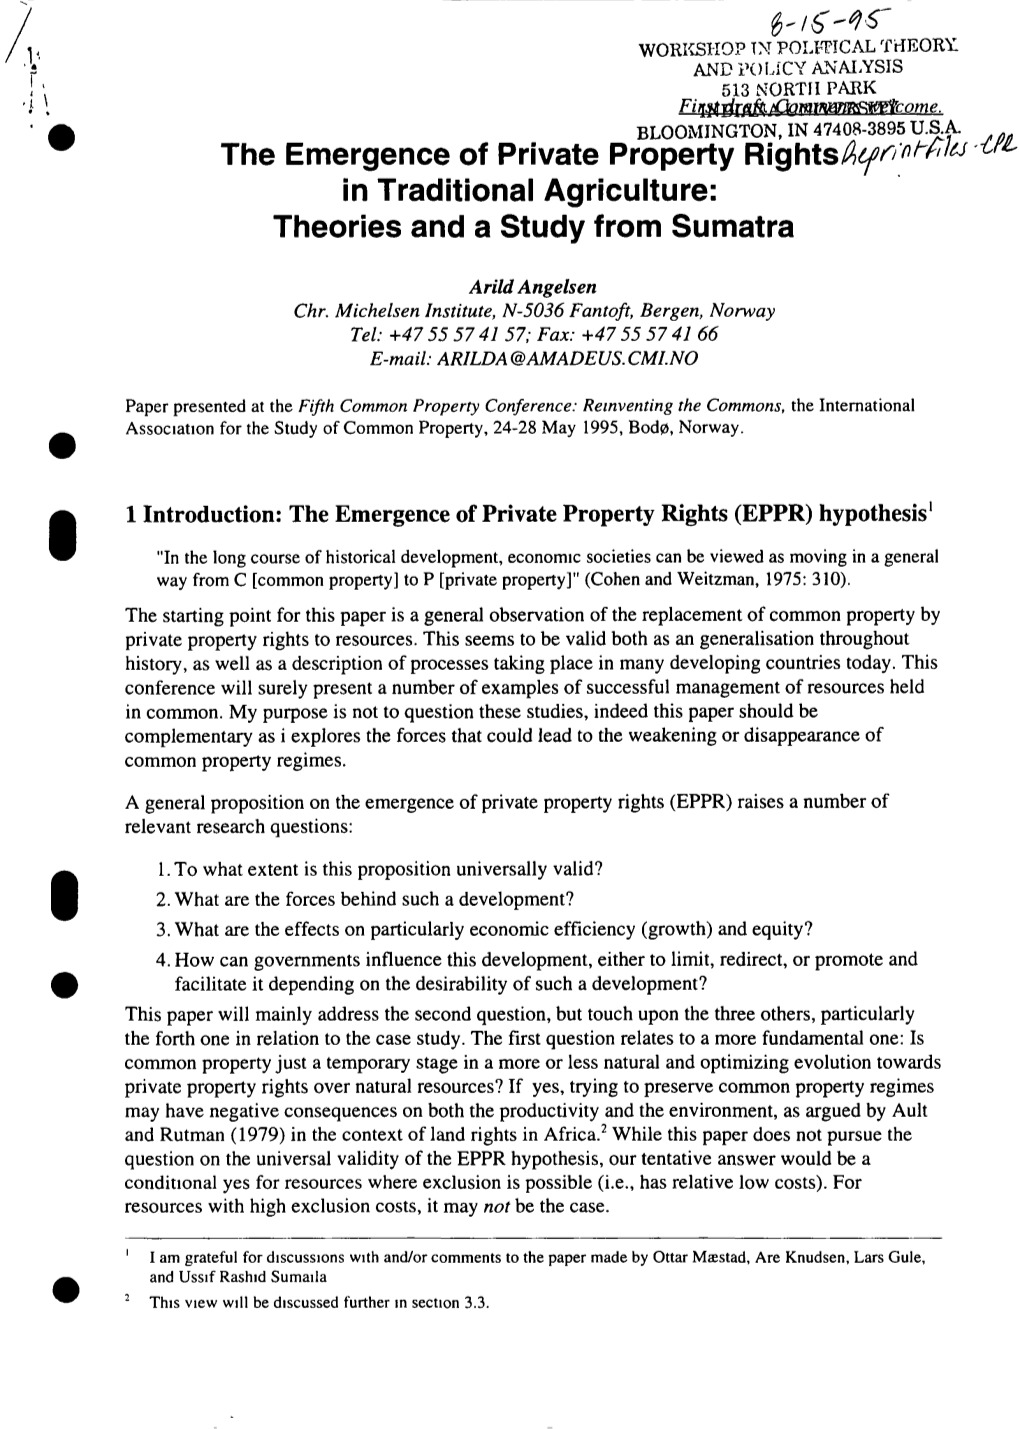 The Emergence of Private Property Rights/?^ in Traditional Agriculture: Theories and a Study from Sumatra